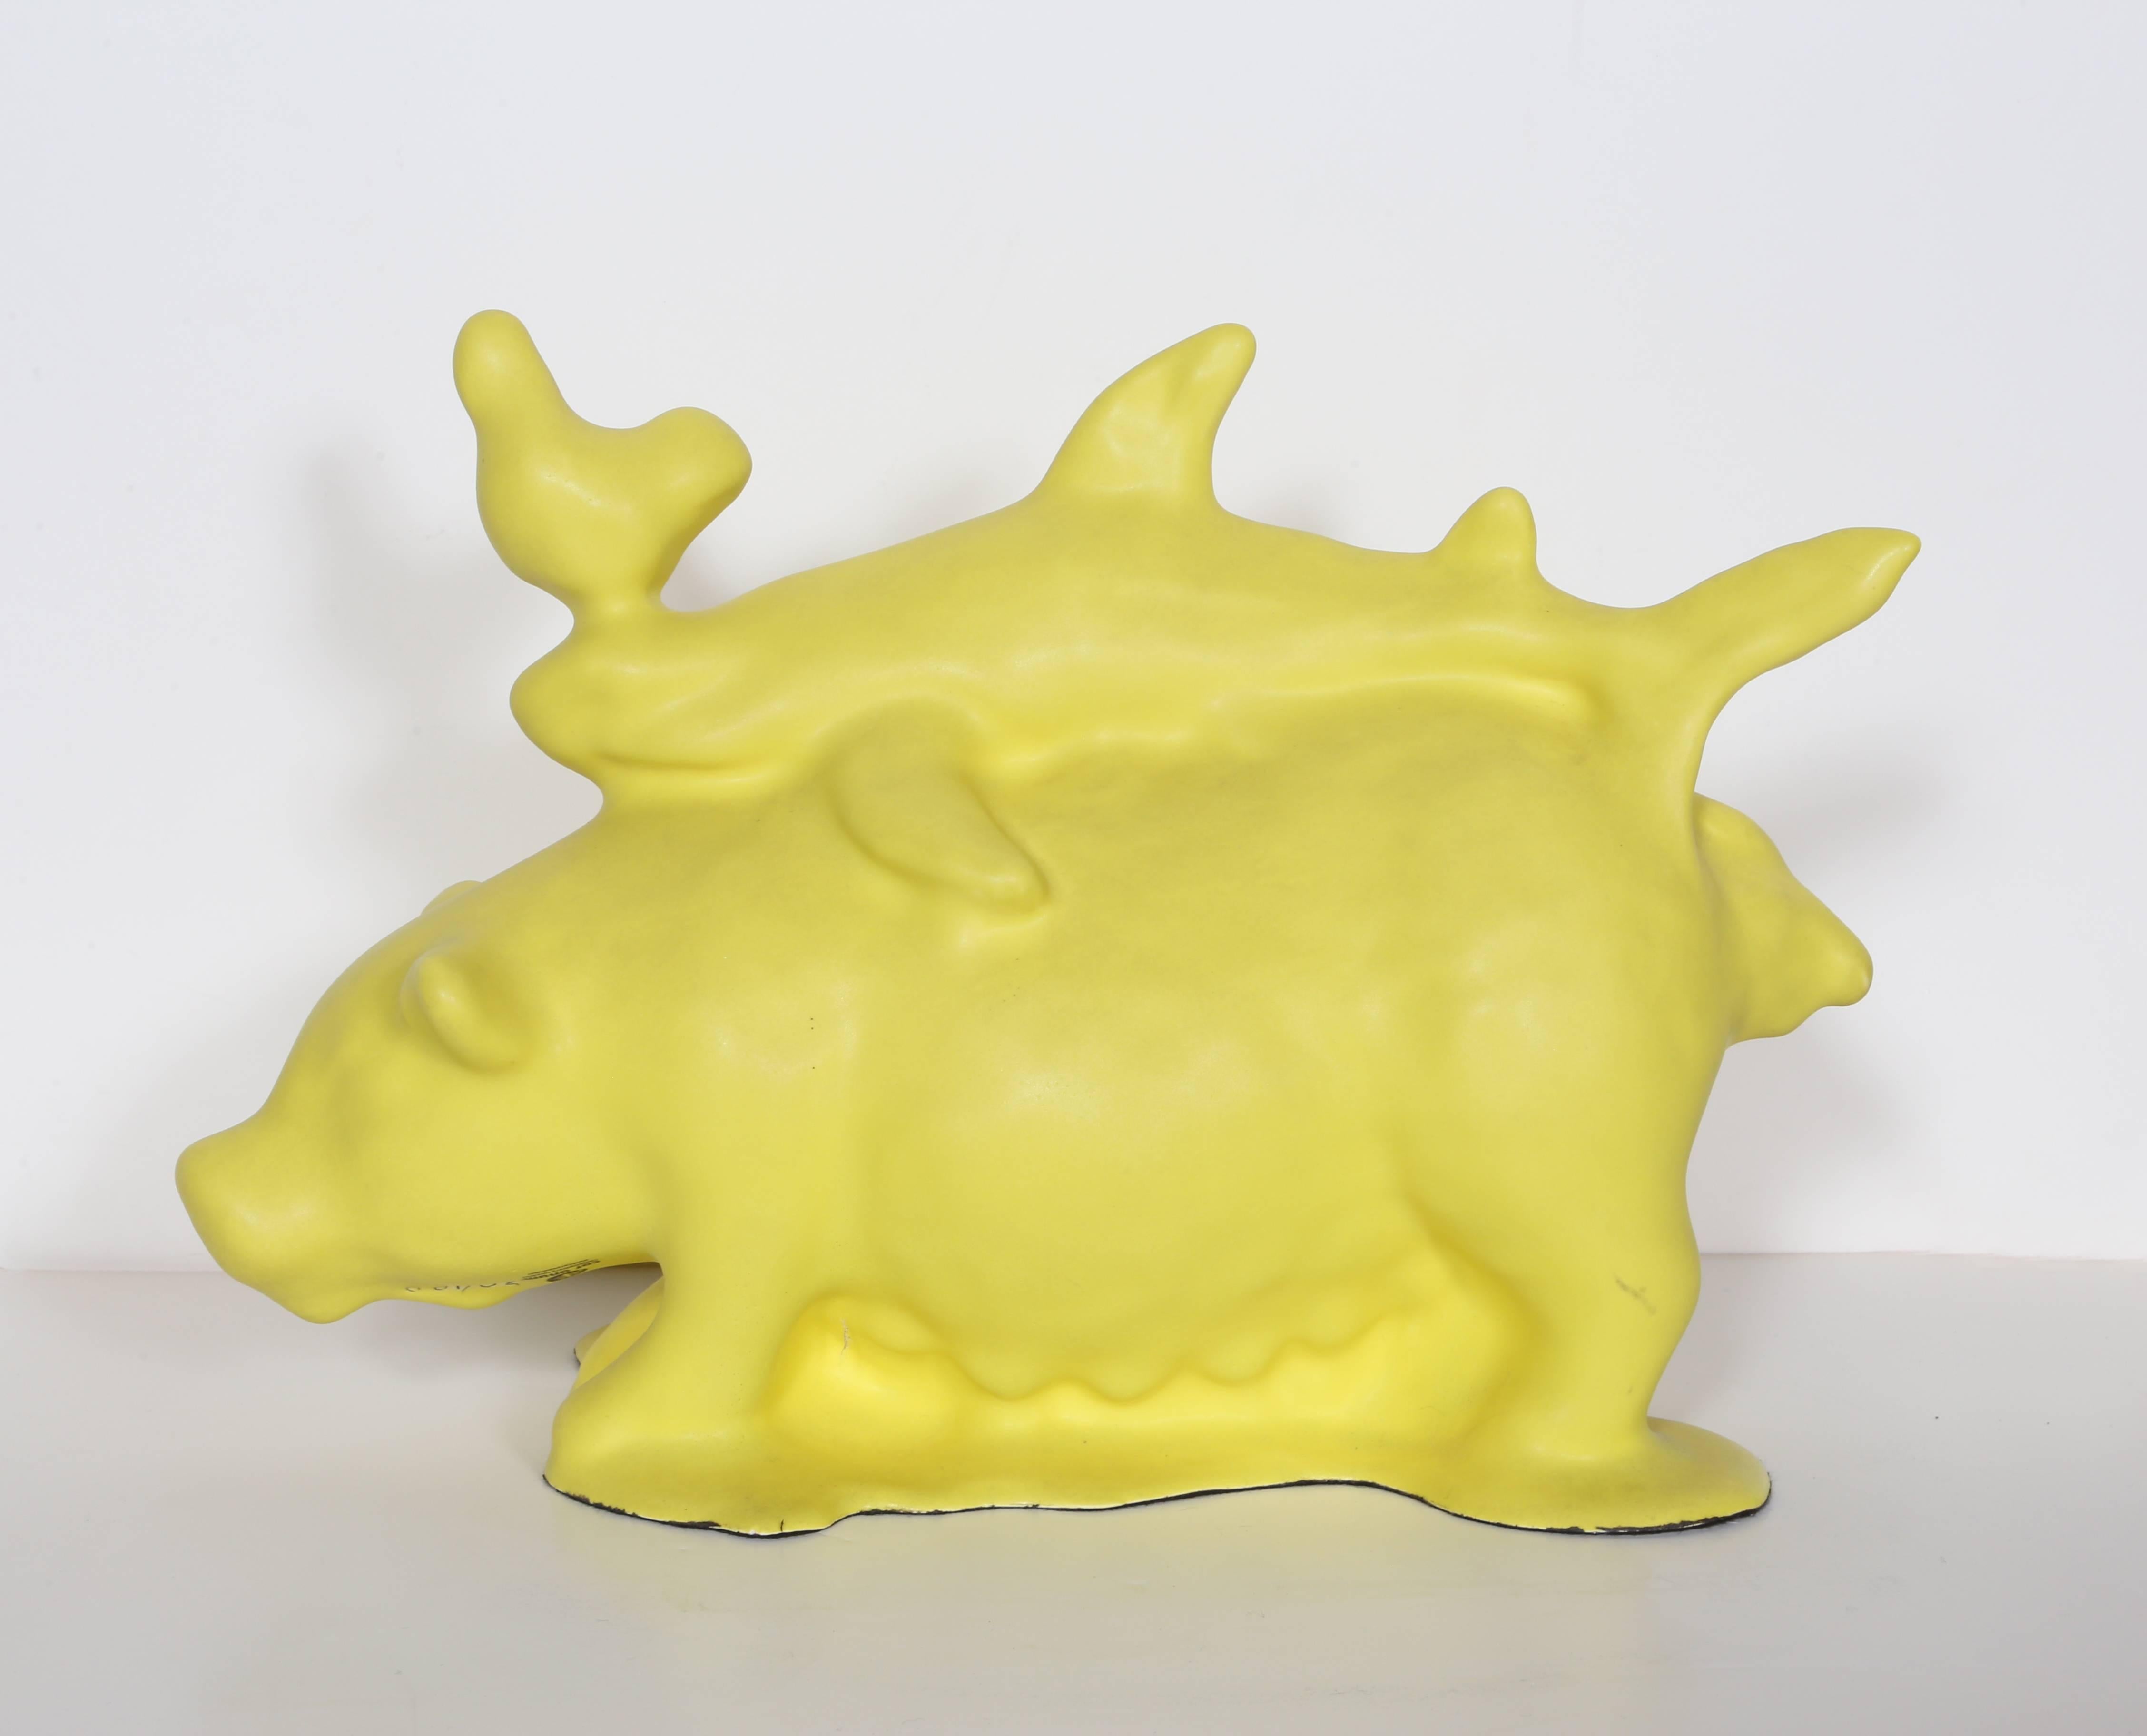 Pig, Shark, Chicken from The Gathering, Ceramic by Bertjan Pot For Sale 1